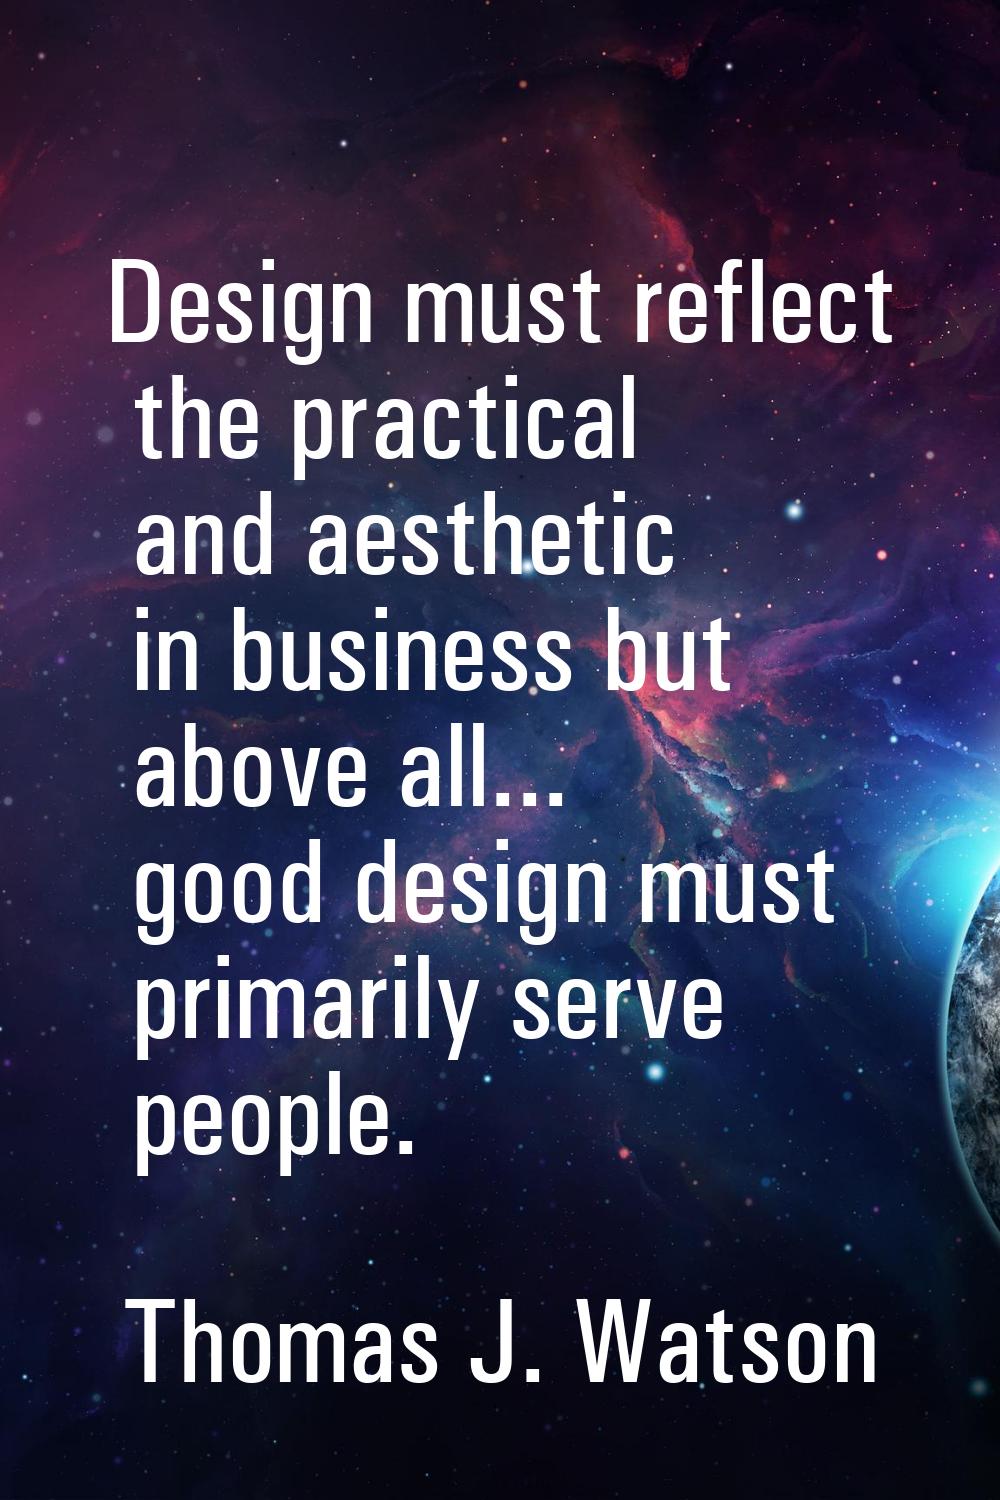 Design must reflect the practical and aesthetic in business but above all... good design must prima